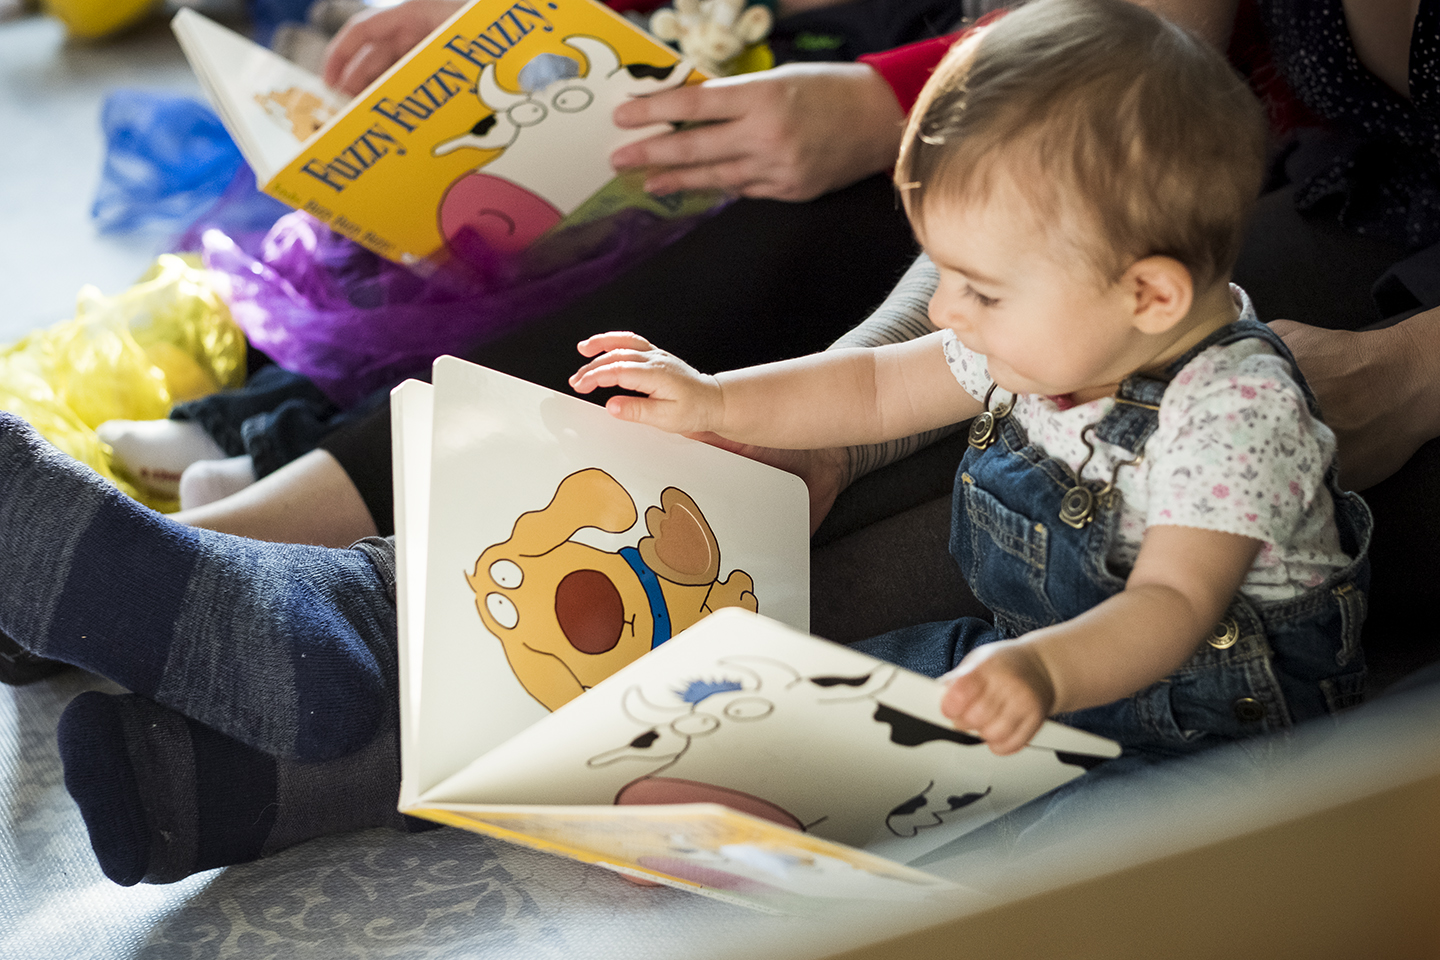 Baby sits on the floor with her parents and holds an open picture book